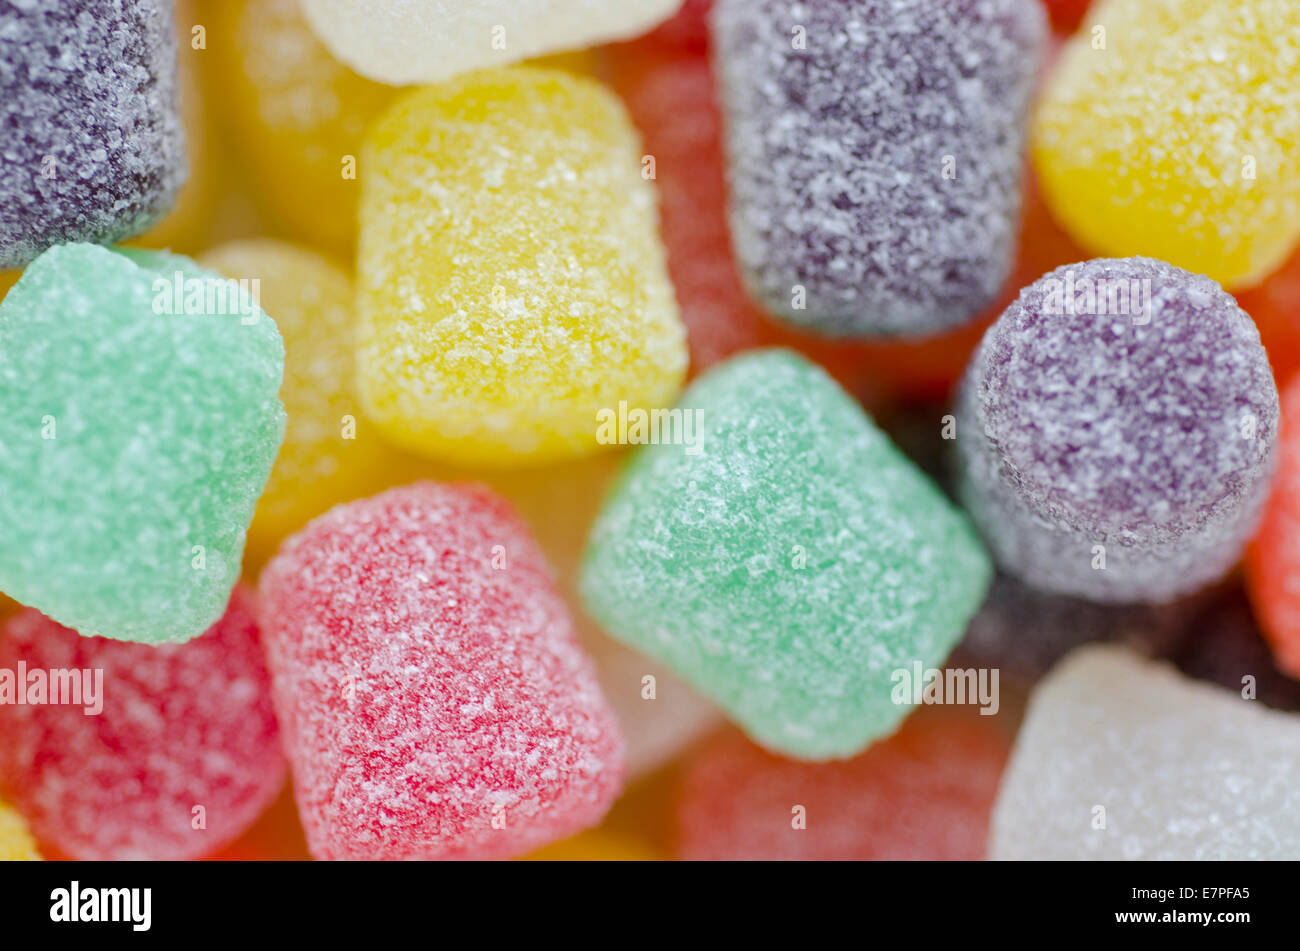 Close-up of colorful gum drops Stock Photo